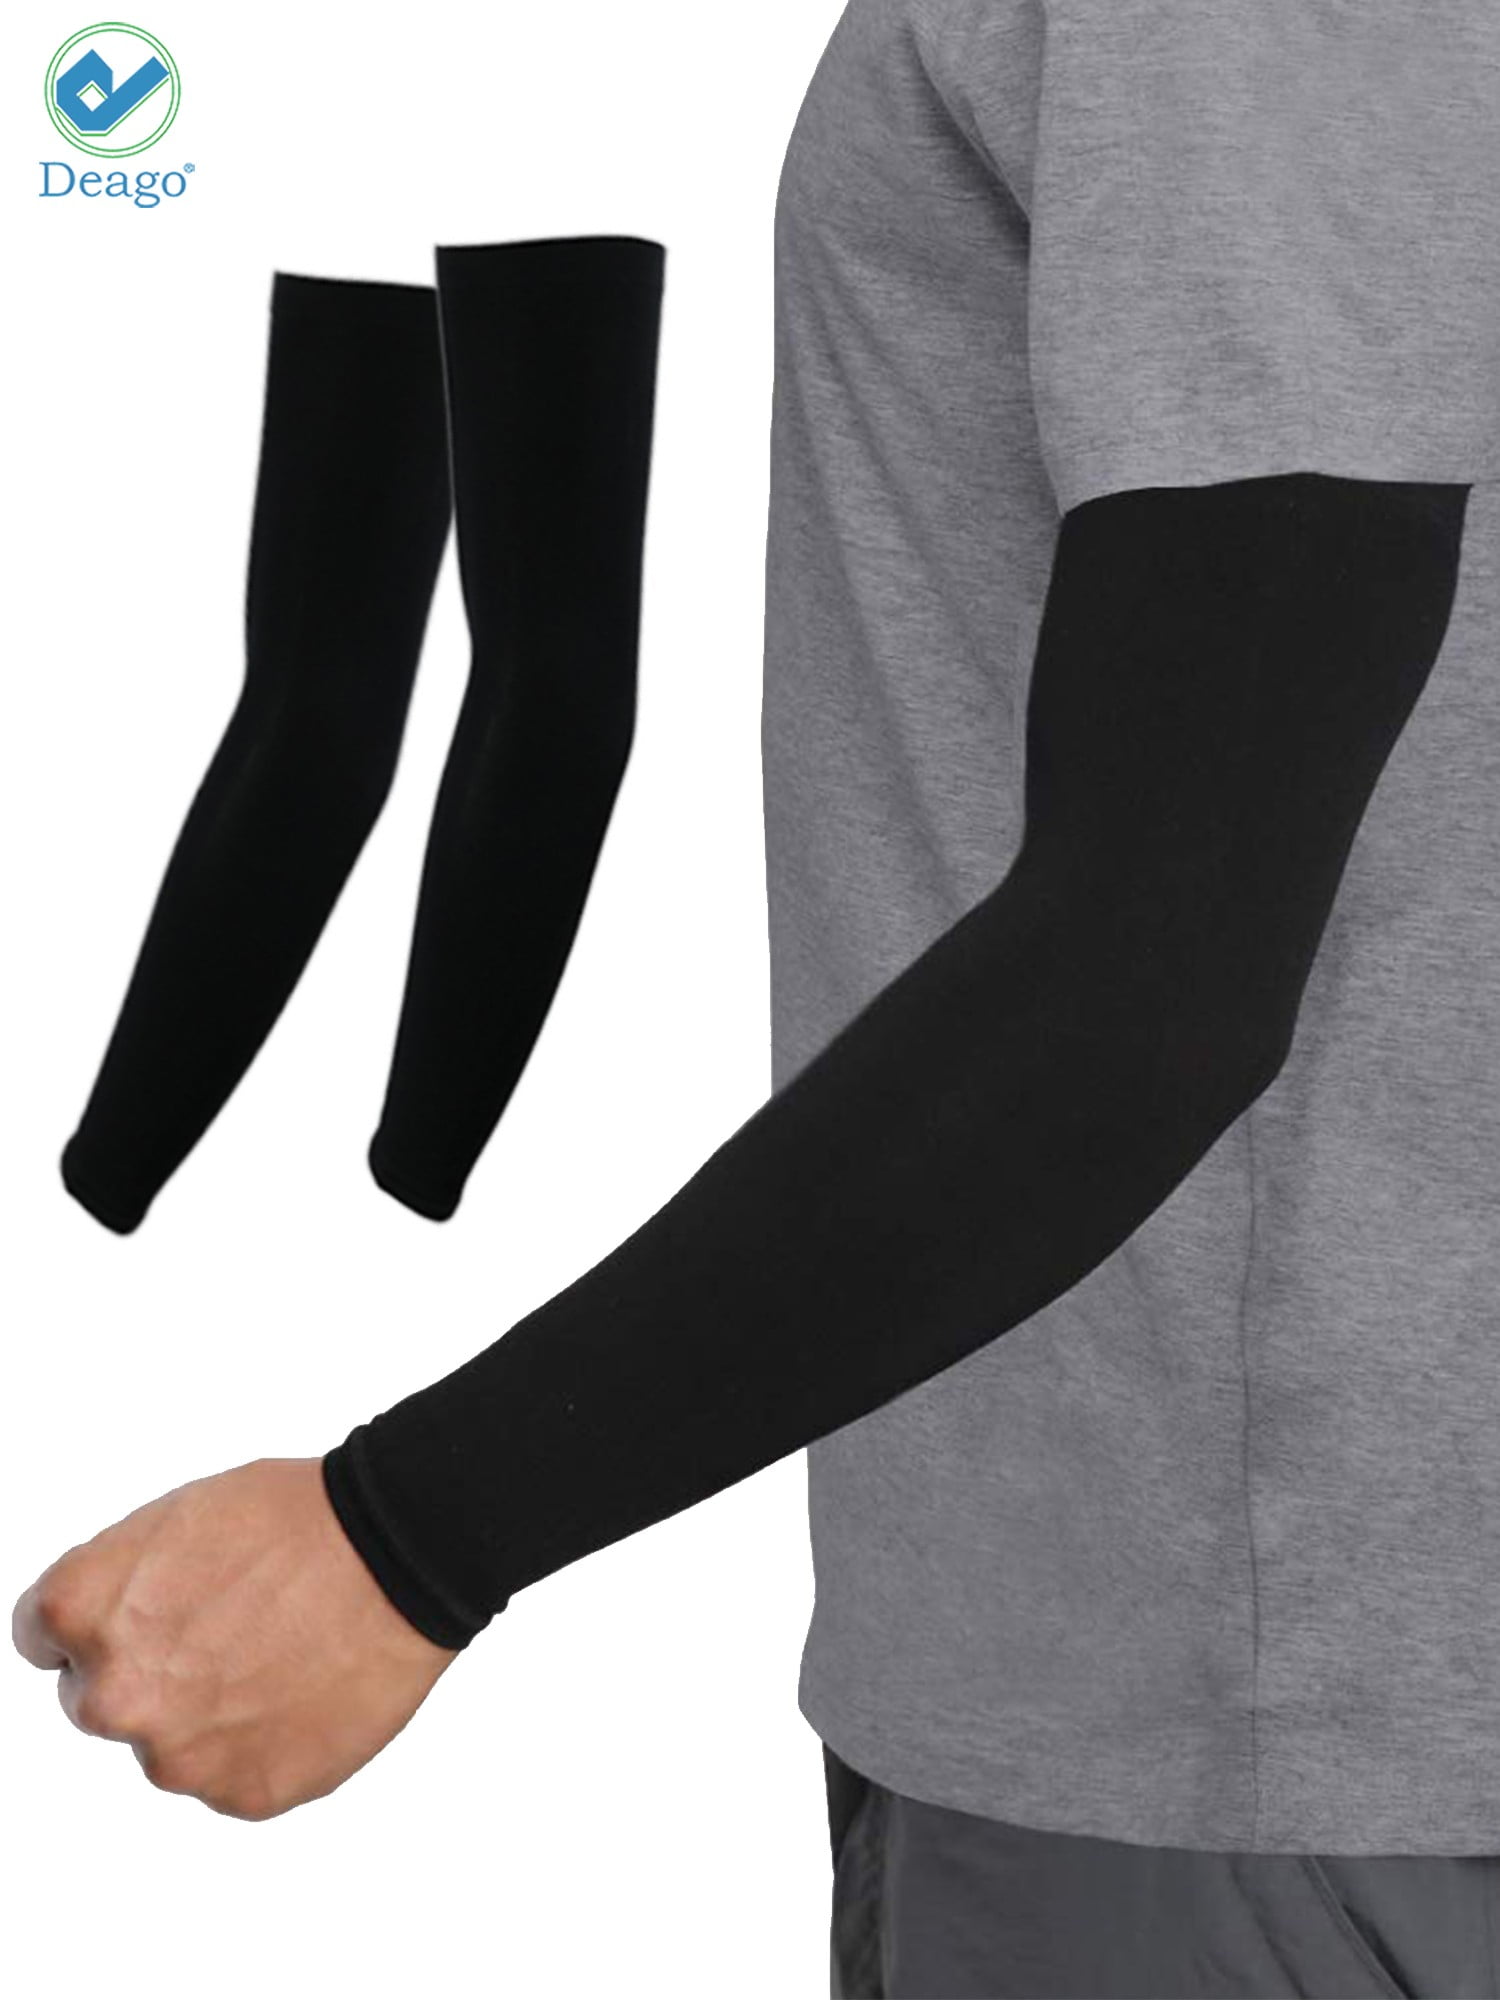 Ice Cooling Arm Sleeves Cover UV Sun Protection Running Black Basketball M7C5 